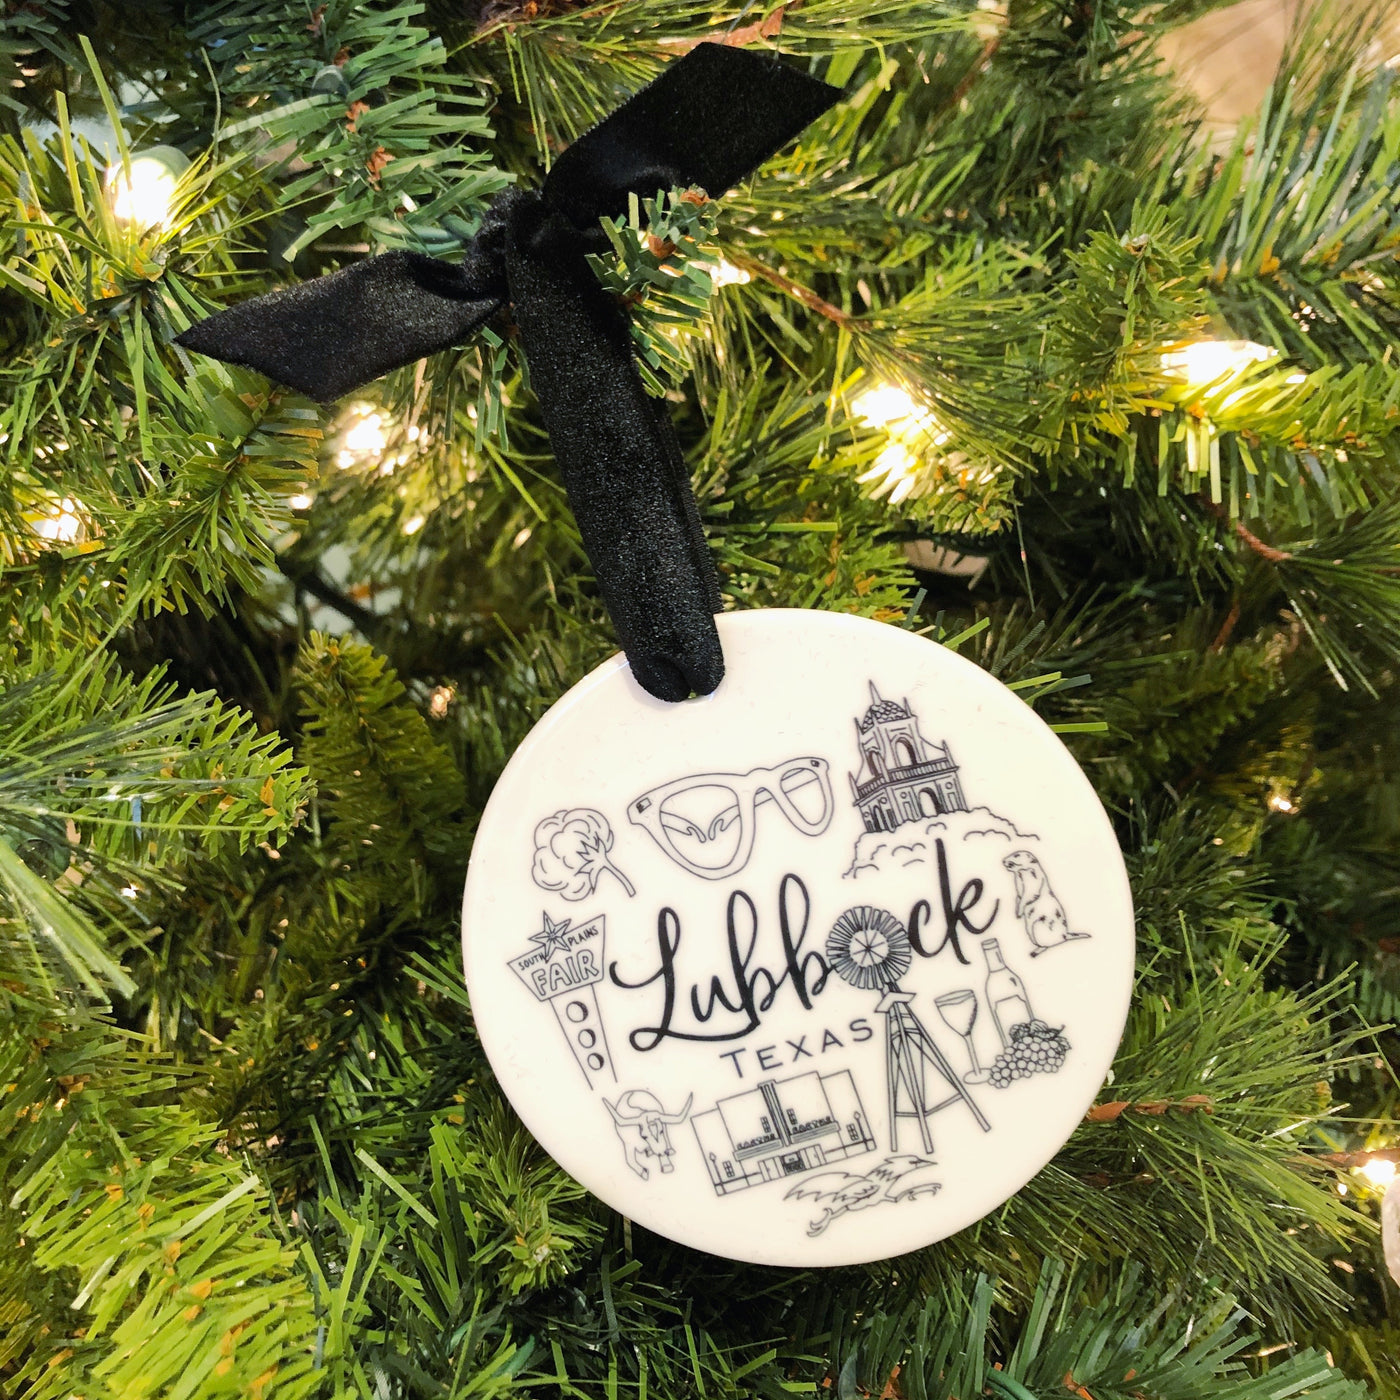 This is Lubbock Ornament - Barque Gifts